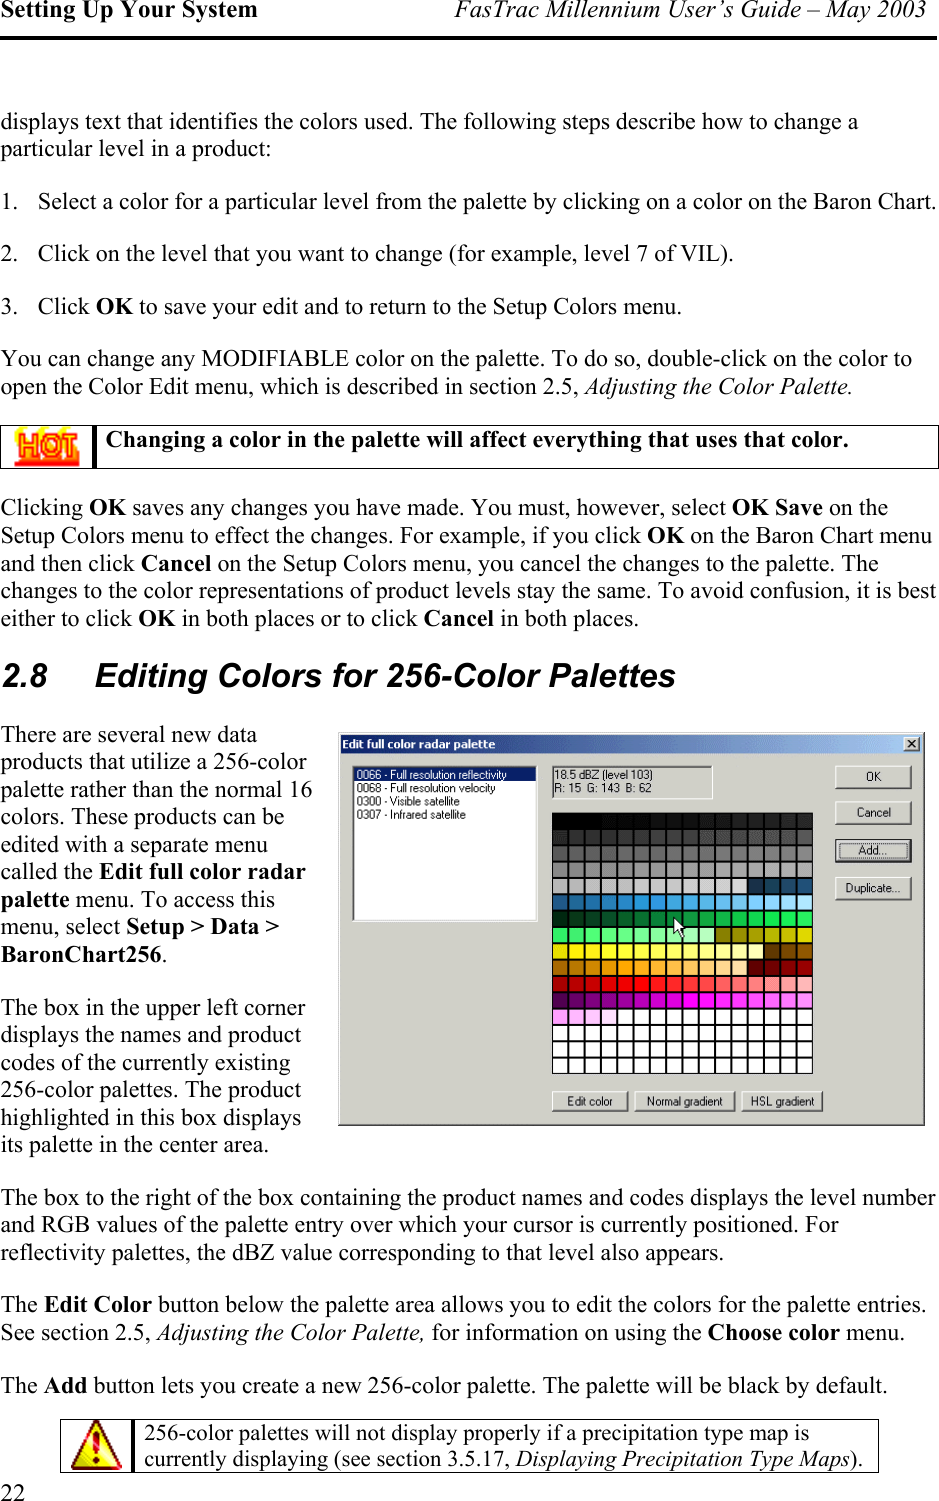 Setting Up Your System  FasTrac Millennium User’s Guide – May 2003 displays text that identifies the colors used. The following steps describe how to change a particular level in a product: 1.  Select a color for a particular level from the palette by clicking on a color on the Baron Chart. 2.  Click on the level that you want to change (for example, level 7 of VIL). 3. Click OK to save your edit and to return to the Setup Colors menu. You can change any MODIFIABLE color on the palette. To do so, double-click on the color to open the Color Edit menu, which is described in section 2.5, Adjusting the Color Palette.  Changing a color in the palette will affect everything that uses that color. Clicking OK saves any changes you have made. You must, however, select OK Save on the Setup Colors menu to effect the changes. For example, if you click OK on the Baron Chart menu and then click Cancel on the Setup Colors menu, you cancel the changes to the palette. The changes to the color representations of product levels stay the same. To avoid confusion, it is best either to click OK in both places or to click Cancel in both places. 2.8  Editing Colors for 256-Color Palettes There are several new data products that utilize a 256-color palette rather than the normal 16 colors. These products can be edited with a separate menu called the Edit full color radar palette menu. To access this menu, select Setup &gt; Data &gt; BaronChart256. The box in the upper left corner displays the names and product codes of the currently existing 256-color palettes. The product highlighted in this box displays its palette in the center area. The box to the right of the box containing the product names and codes displays the level number and RGB values of the palette entry over which your cursor is currently positioned. For reflectivity palettes, the dBZ value corresponding to that level also appears. The Edit Color button below the palette area allows you to edit the colors for the palette entries. See section 2.5, Adjusting the Color Palette, for information on using the Choose color menu. The Add button lets you create a new 256-color palette. The palette will be black by default.   256-color palettes will not display properly if a precipitation type map is currently displaying (see section 3.5.17, Displaying Precipitation Type Maps). 22 